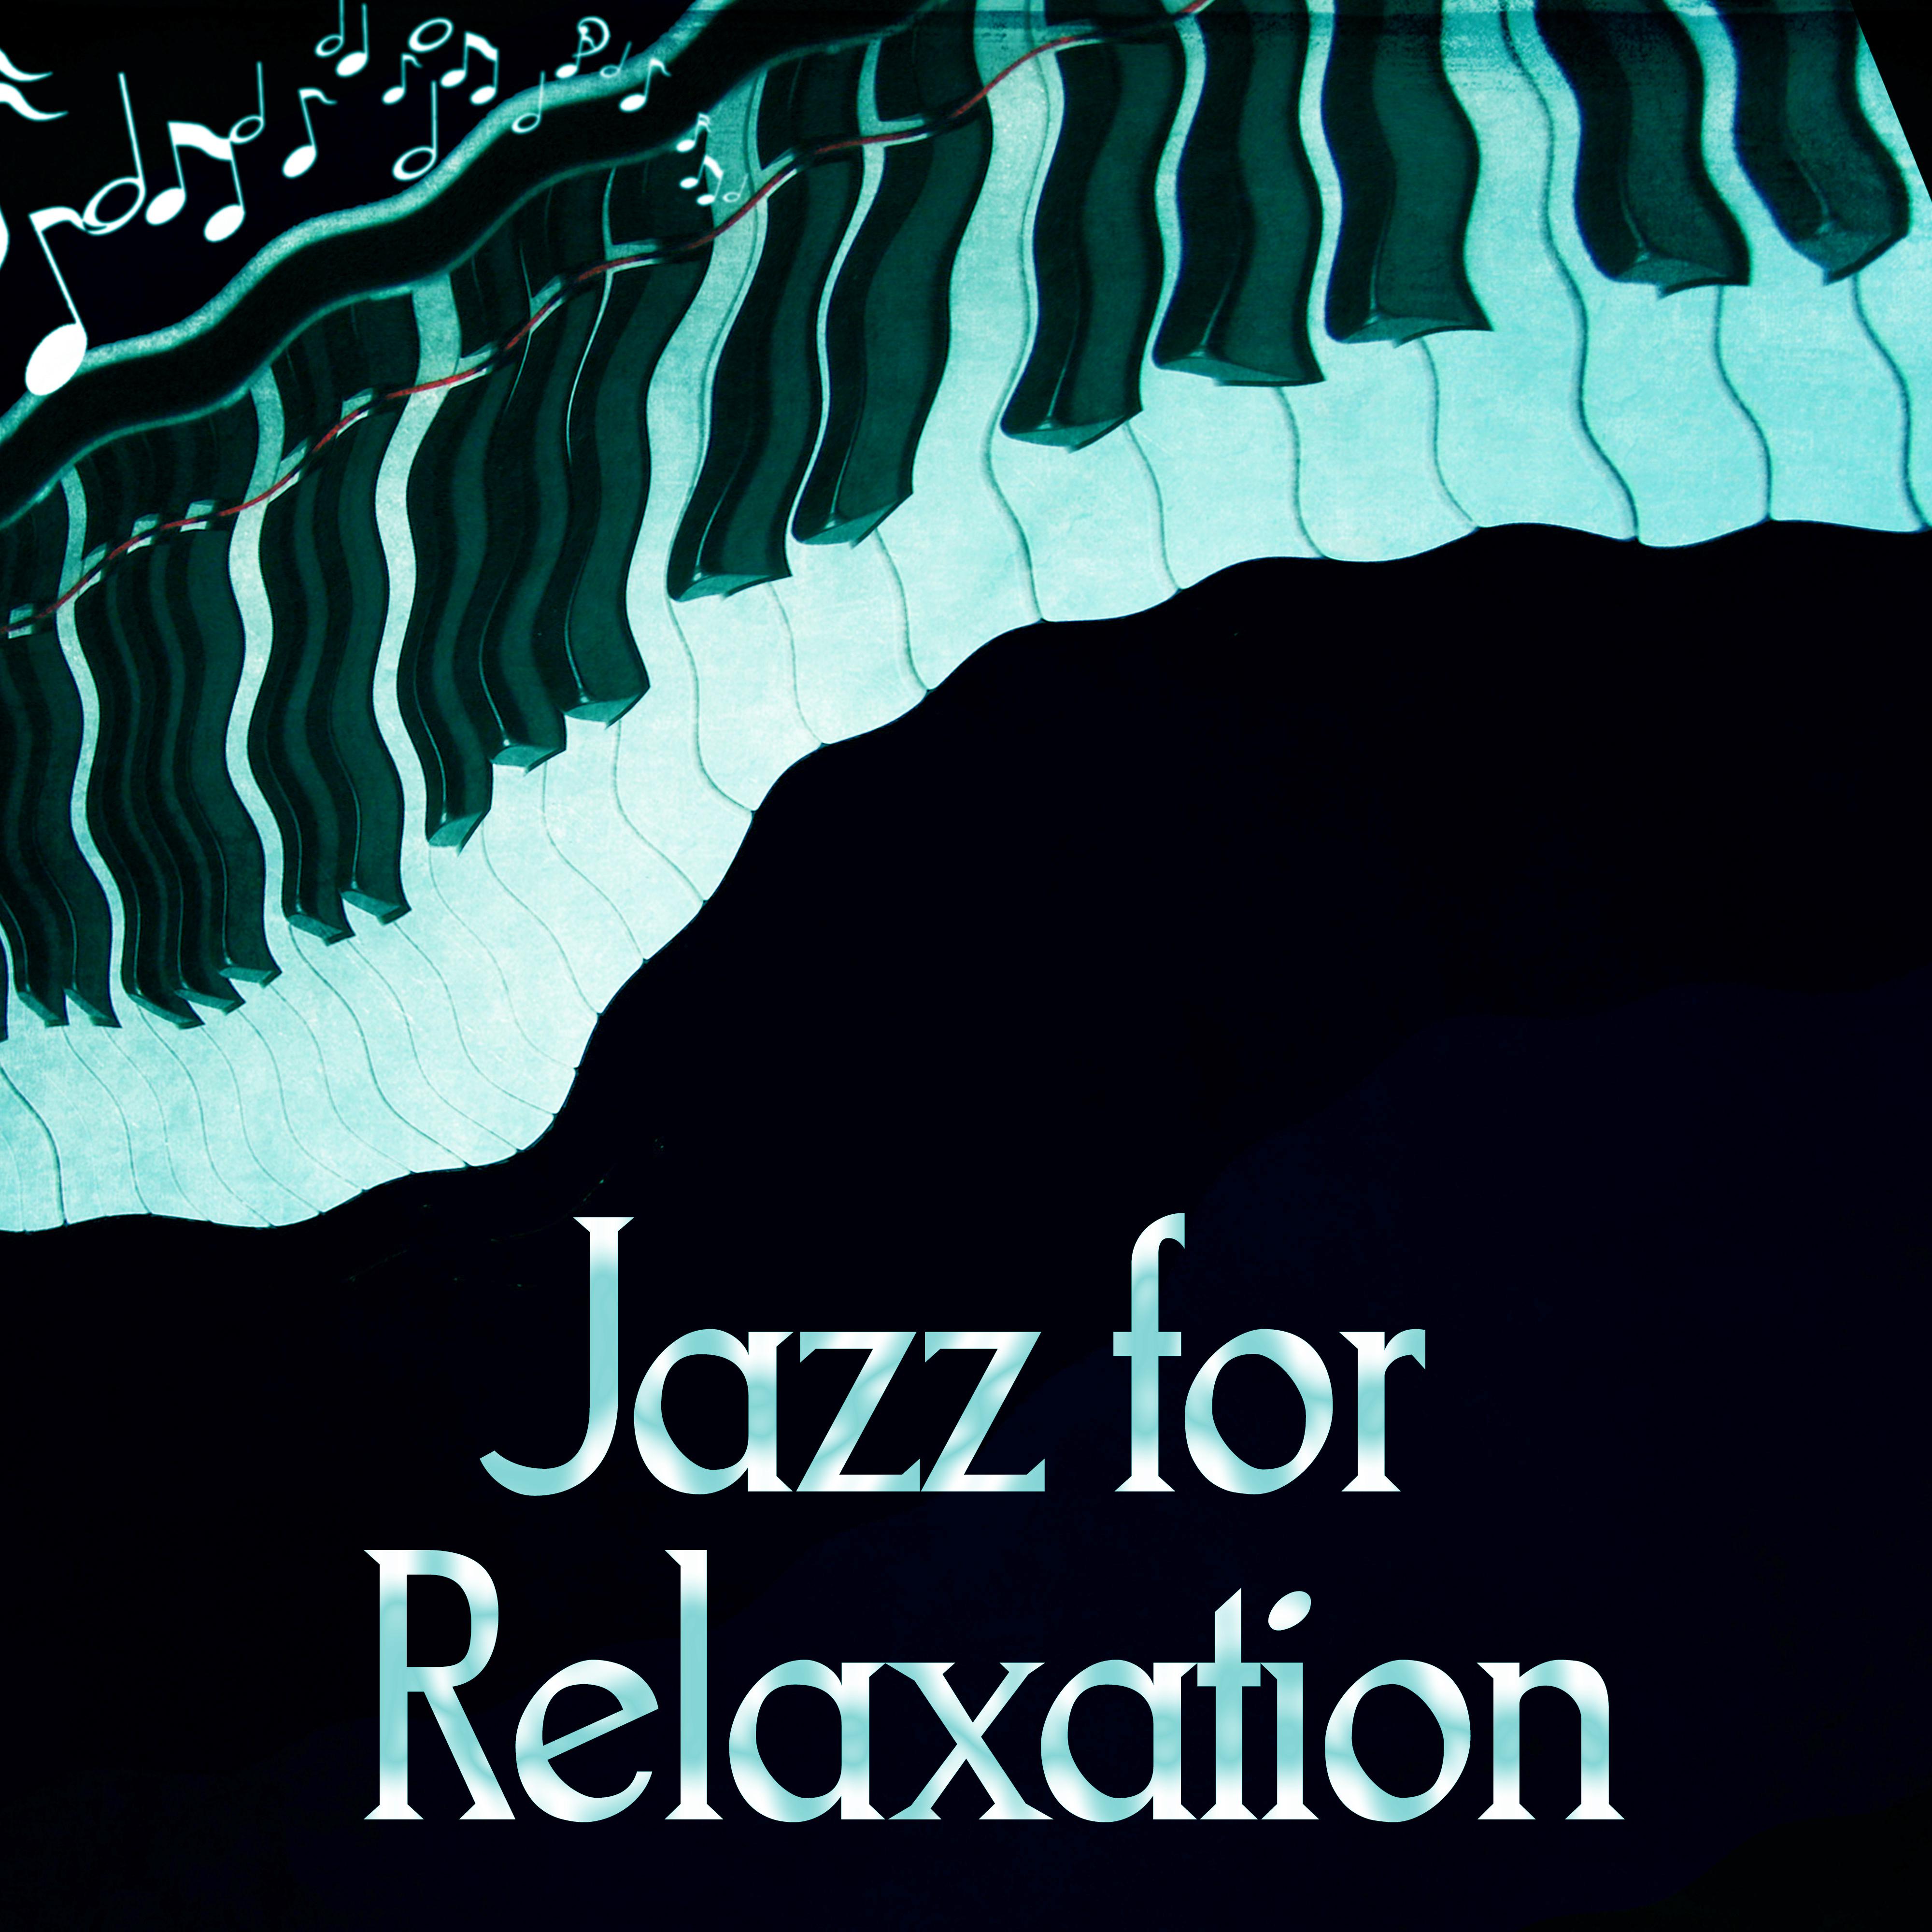 Jazz for Relaxation  Relax in Restaurant, Soft Jazz to Relax, Mellow Jazz, Restaurant  Cafe Bar